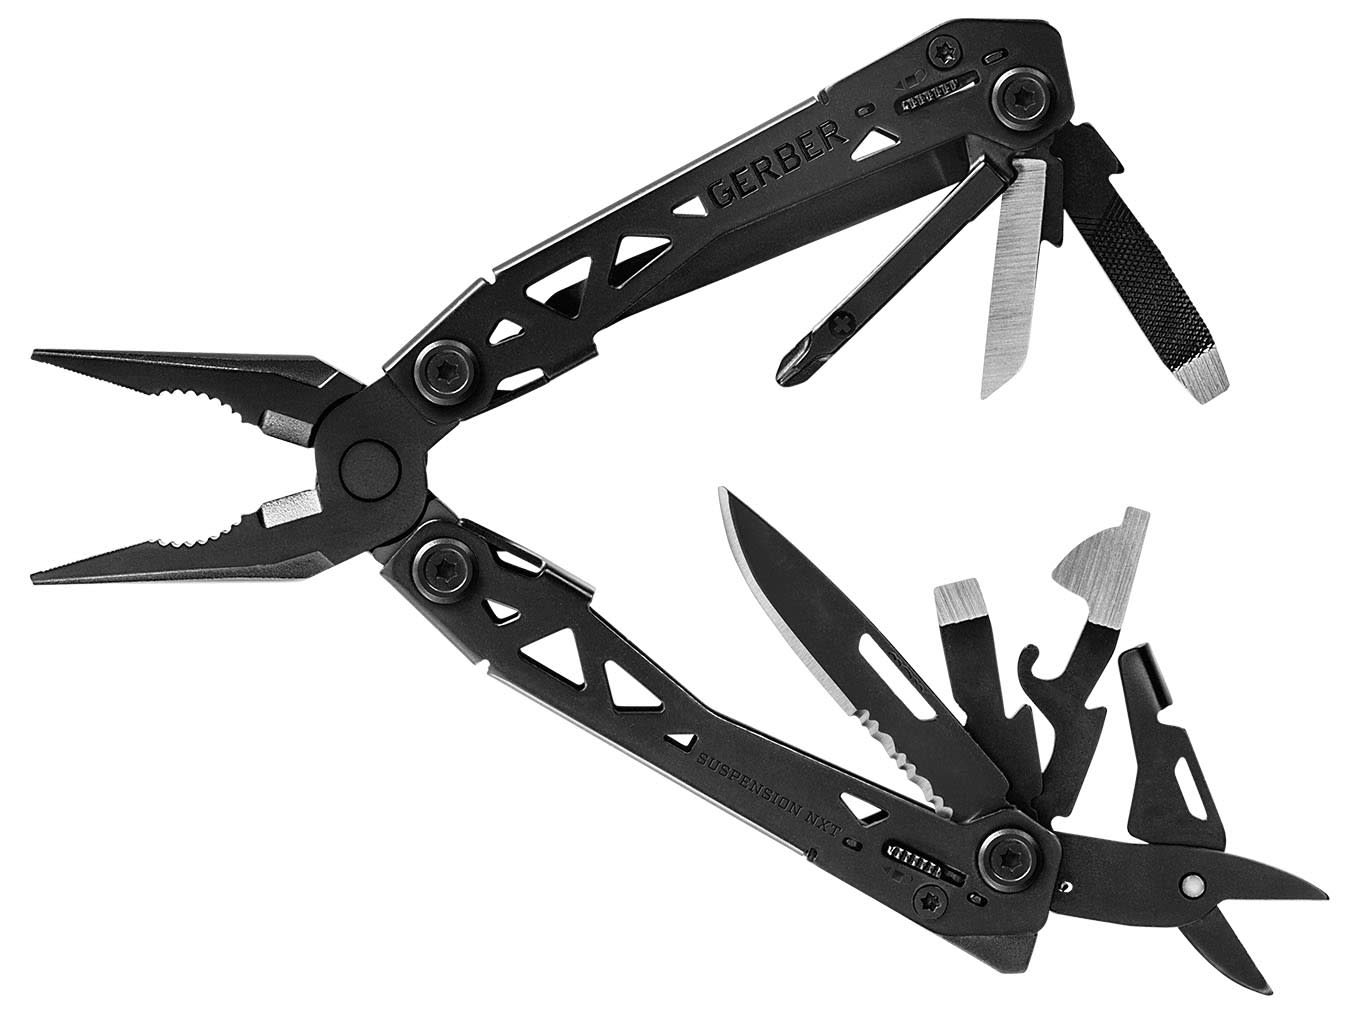 Gerber® Suspension NXT Folding Knife and Paraframe Multi-tool Combo